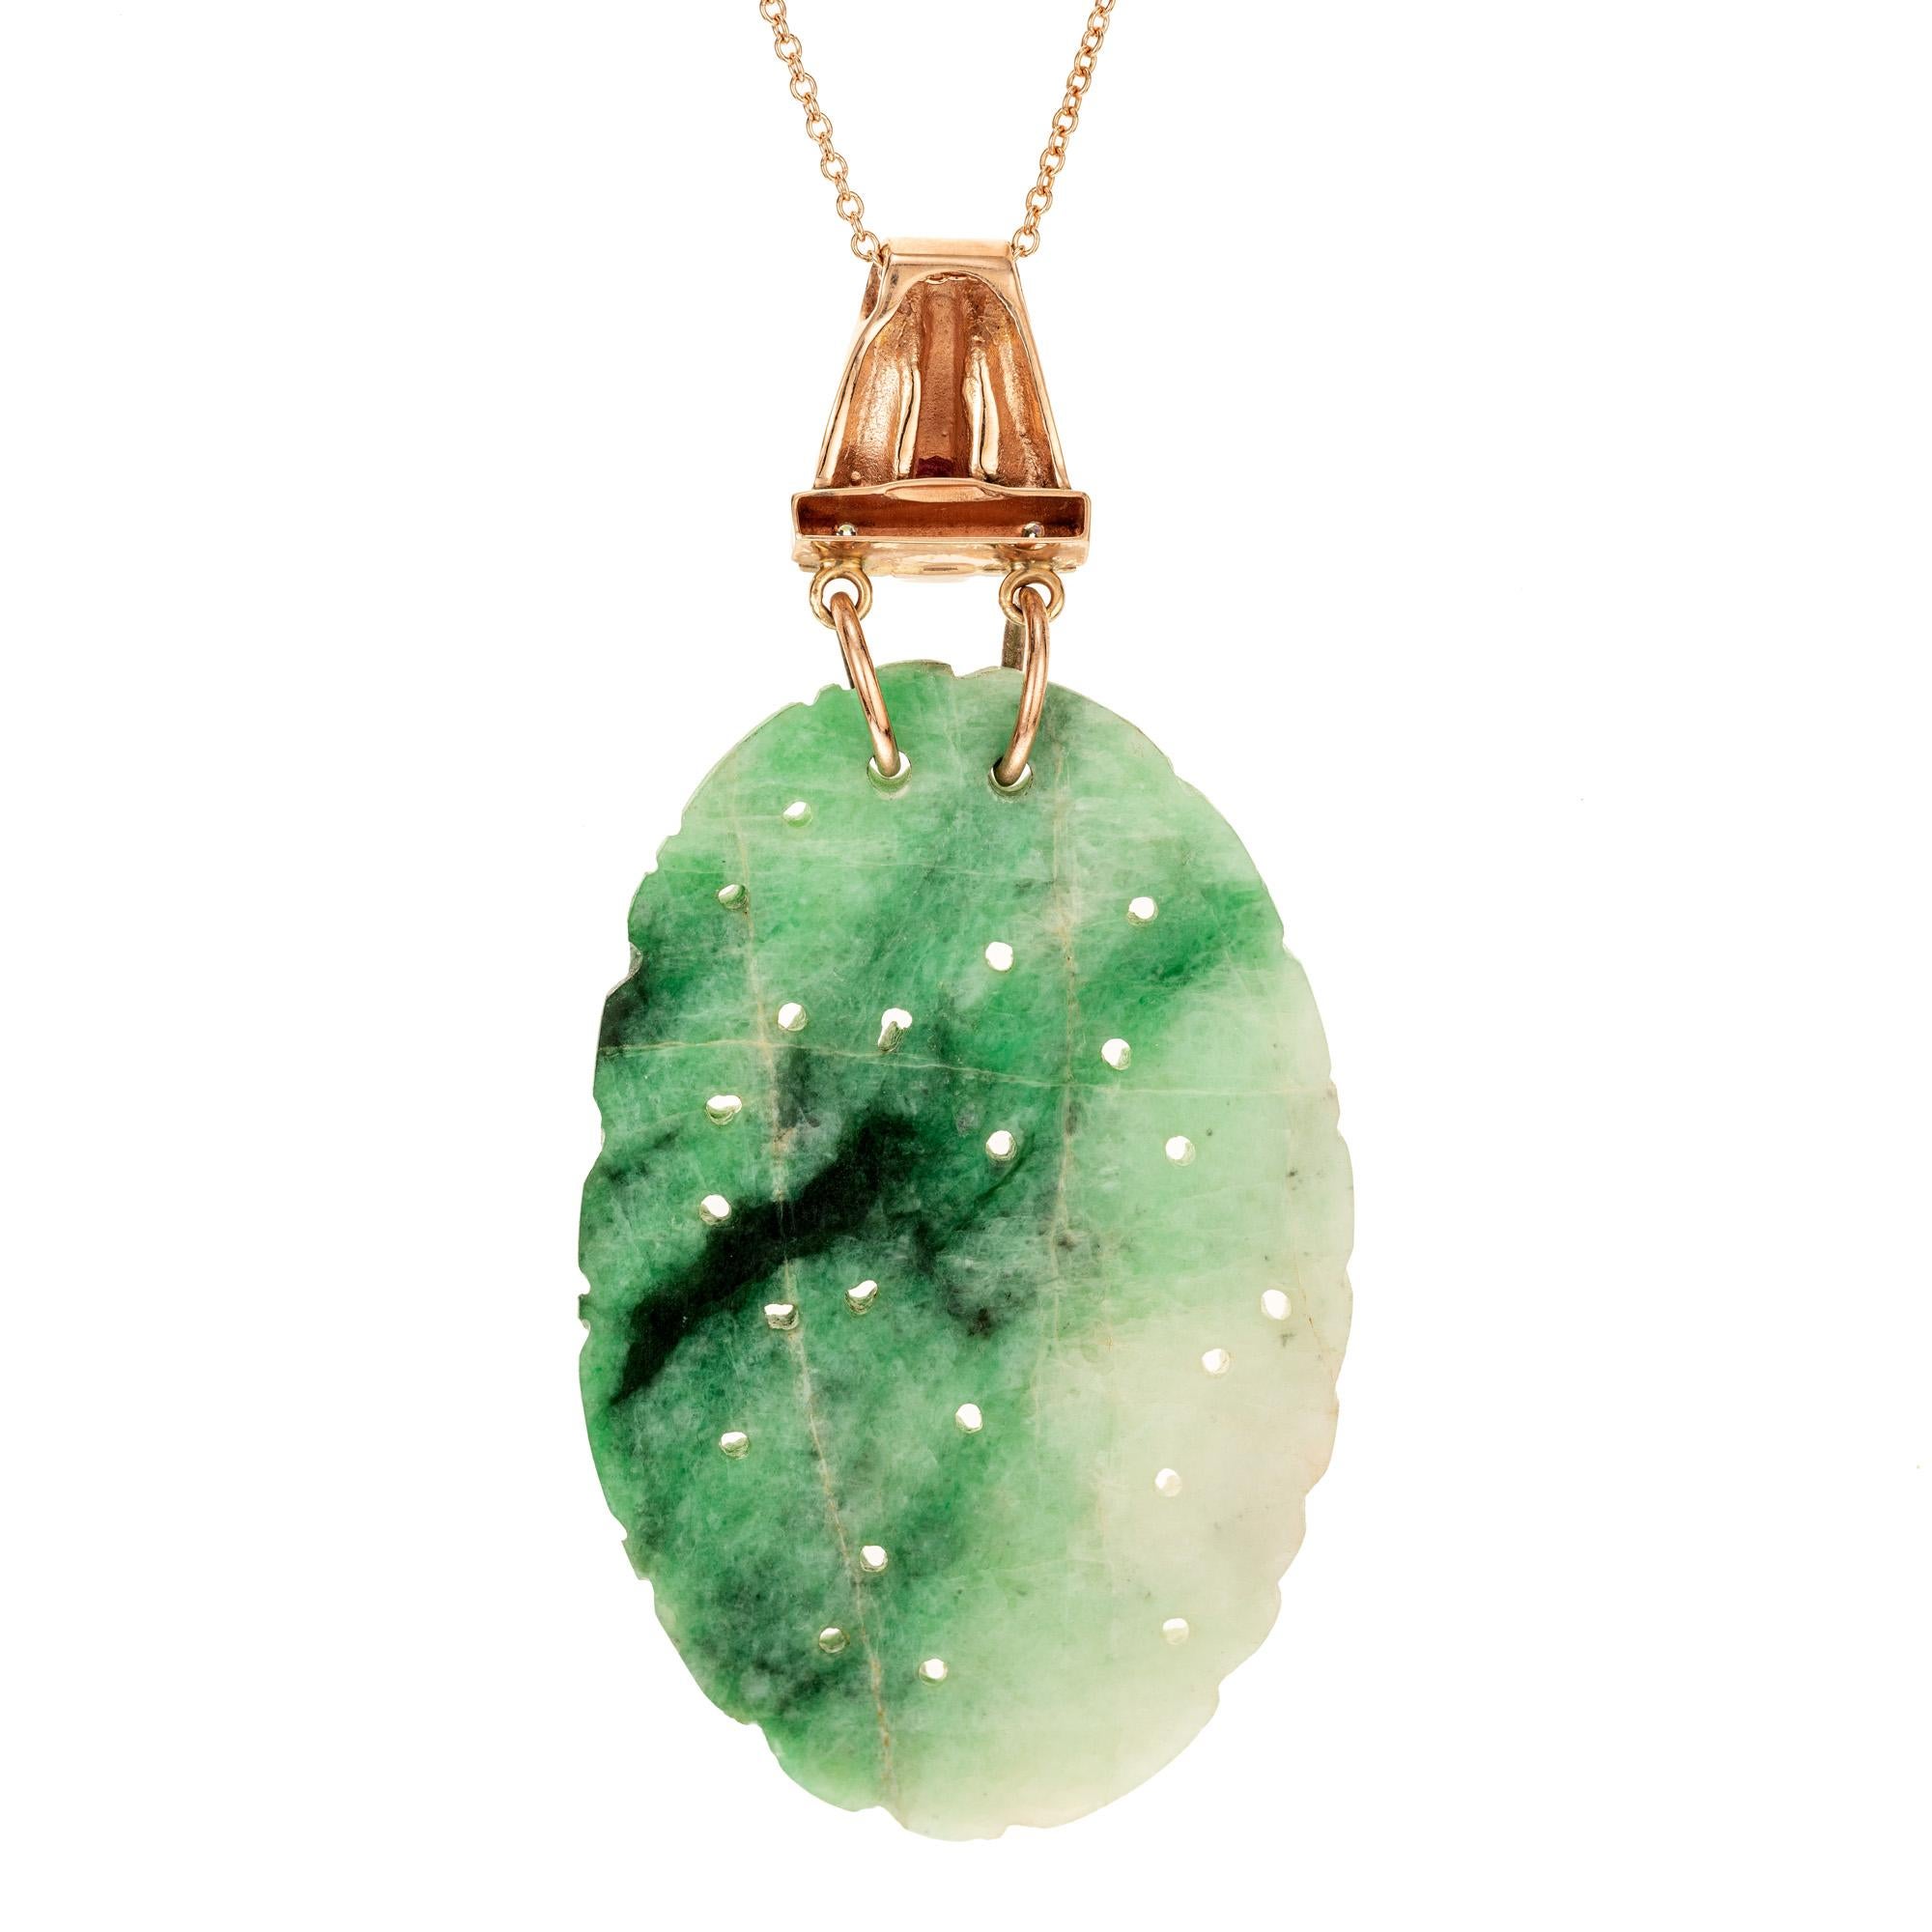 Retro Art Deco 1940's jade, diamond and ruby pendant necklace. GIA certified 43.79cts oval variegated jadeite jade, polished and carved with a 14k rose gold bail, accented with 2 single cut diamonds and 2 square cut red rubies. Certified all